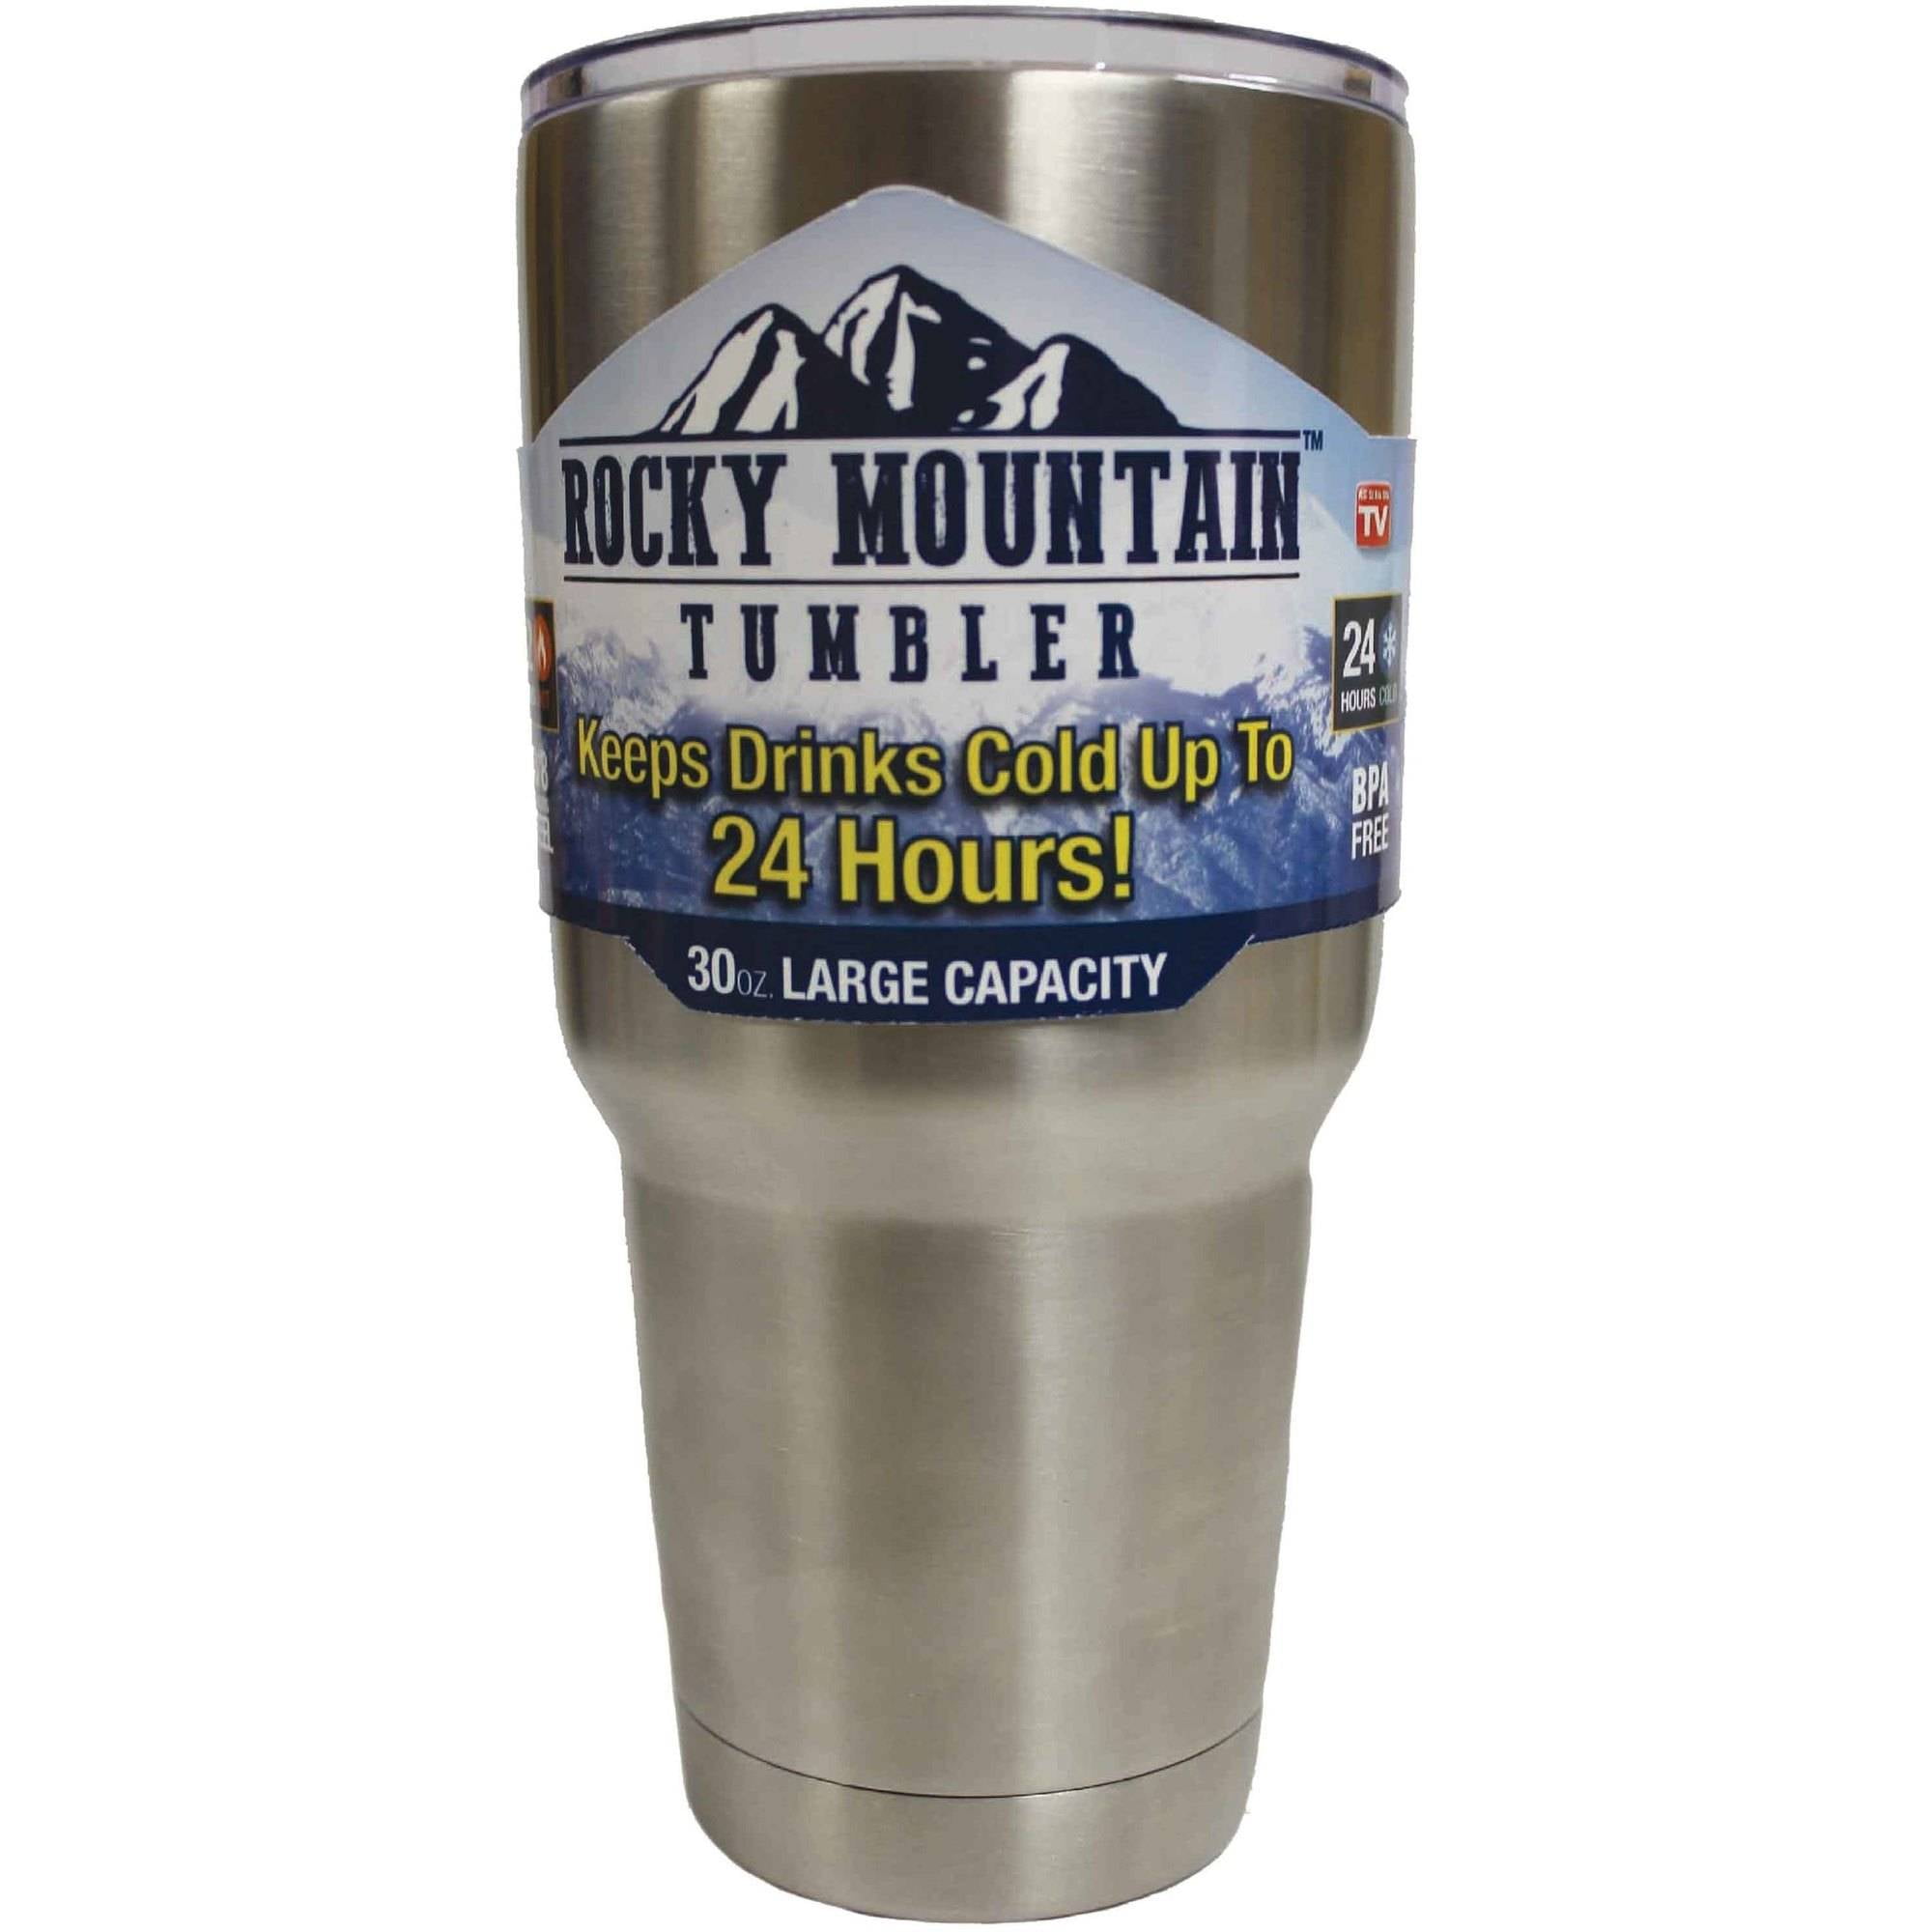 realtime stock count .The amazing Rocky Mountain ™ Tumbler keeps... 